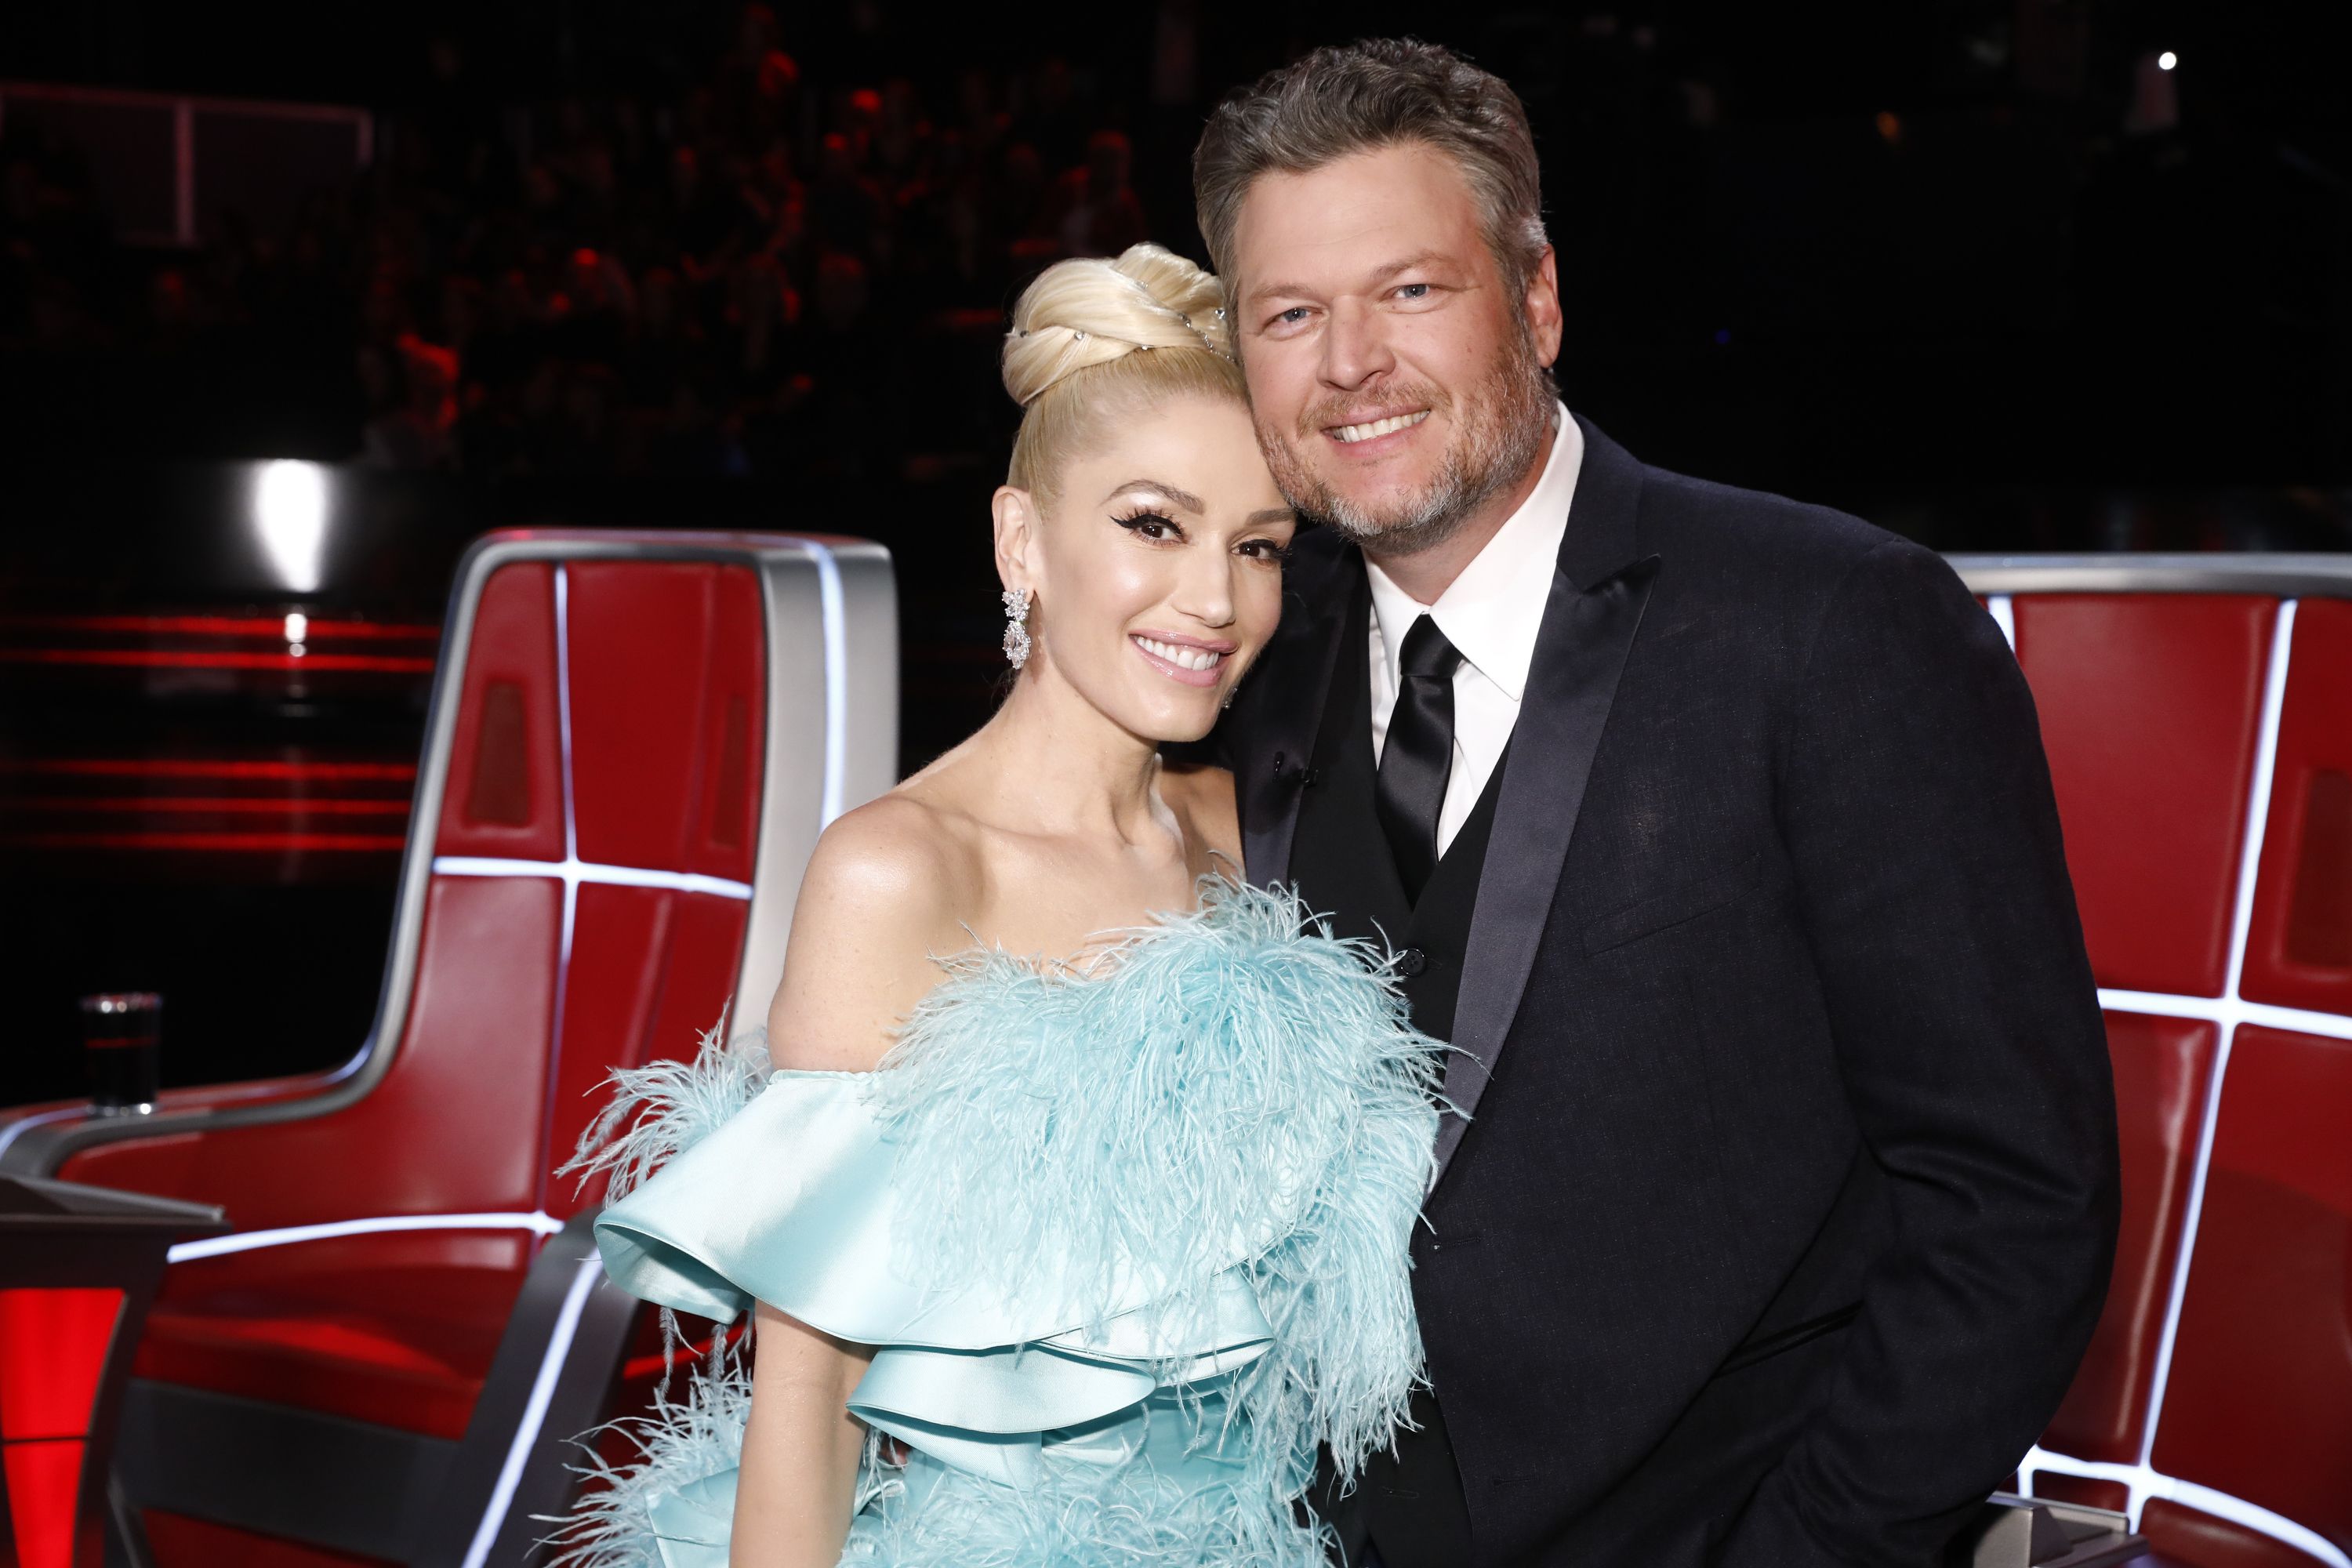 Gwen Stefani and Blake Shelton Want to Get Married After COVID-19 Crisis